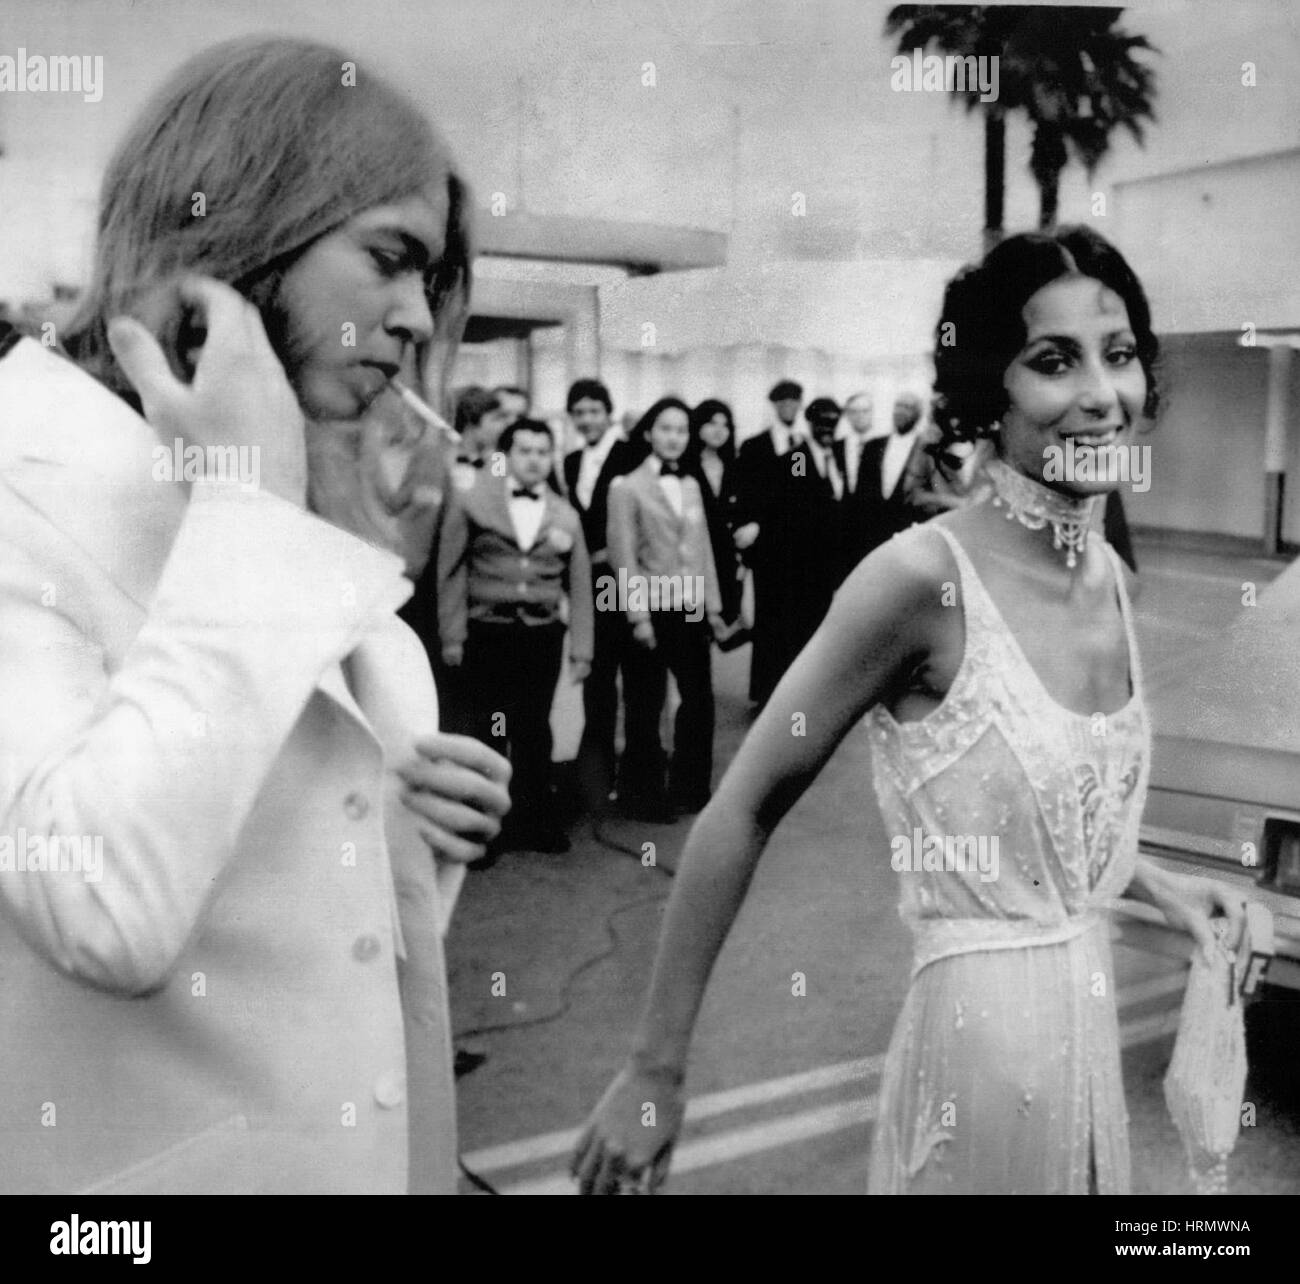 Jun. 30, 1975 - Married - Cher Bono, divorced last Friday from her singing and television partner Sonny Bono, was married Monday to rock star Gregg Allman, left, during a brief ceremony performed at Caesar's Palace Hotel in Las Vegas. Cher and Allman, 27, a singer and songwriter with The Allman Band, were whisked away in a limousine immediately after the ceremony and refused to speak with reporters. EDS: Photo taken May 19, 1975 at the Emmy Awards in Los Angeles. (Credit Image: © Keystone Press Agency/Keystone USA via ZUMAPRESS.com) Stock Photo